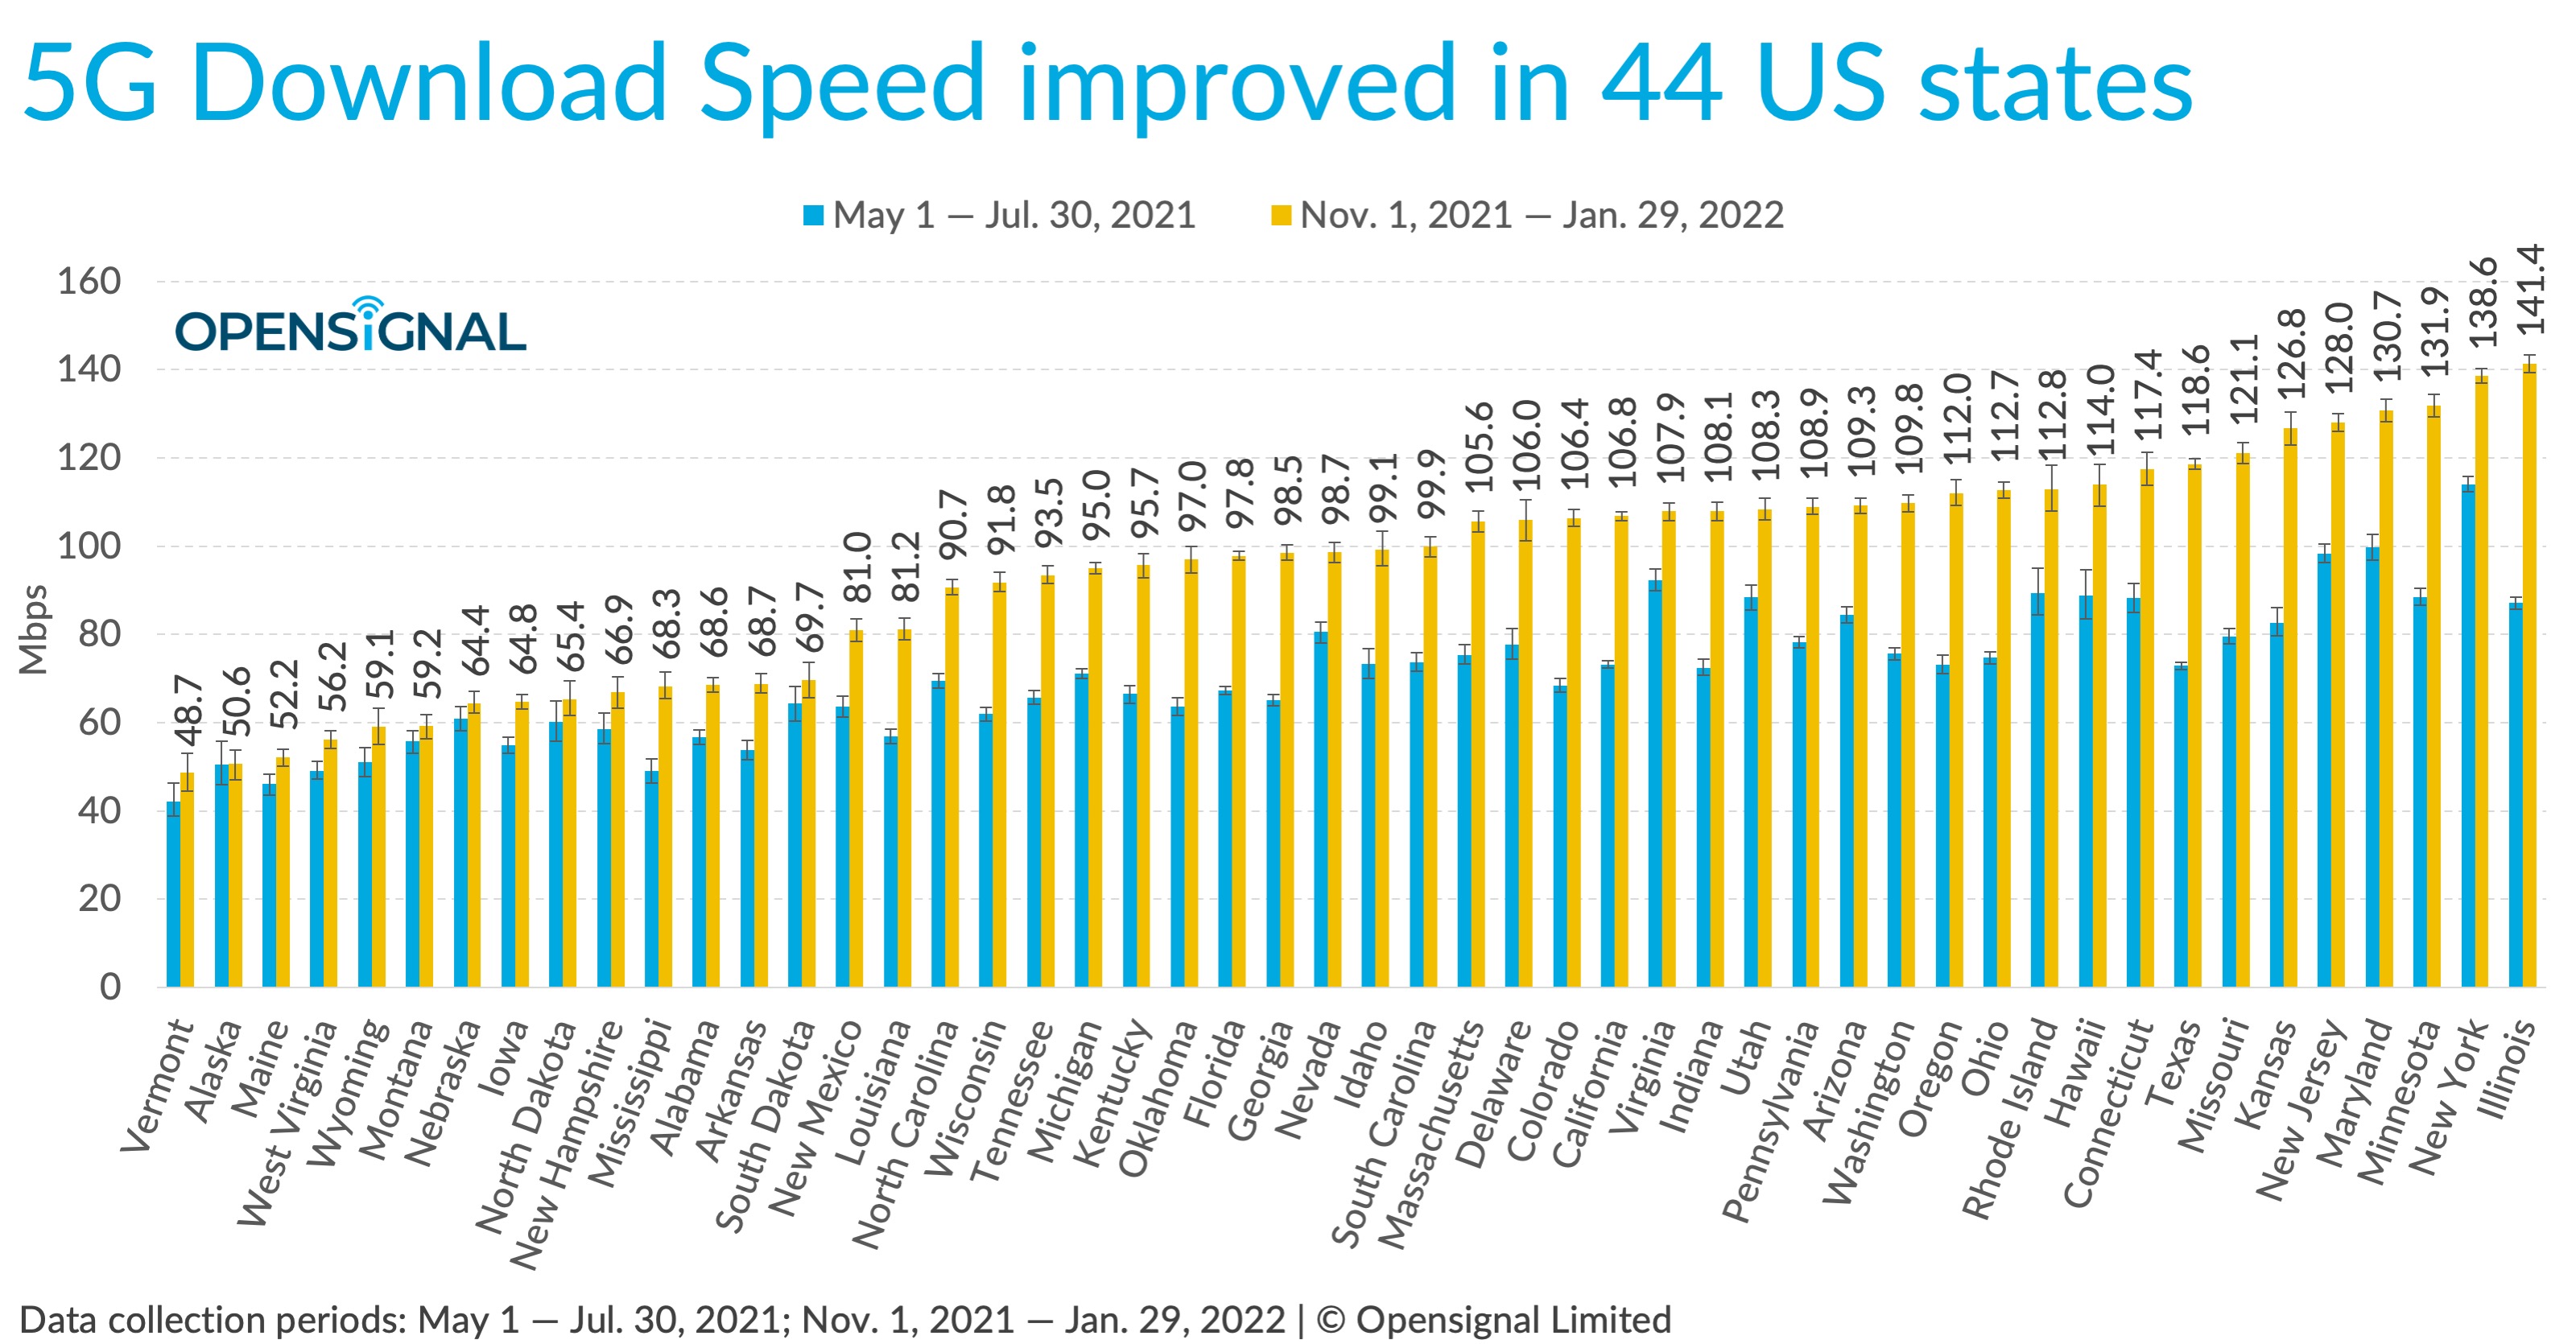 Where's the fastest 5G in the US - and most improved 5G?